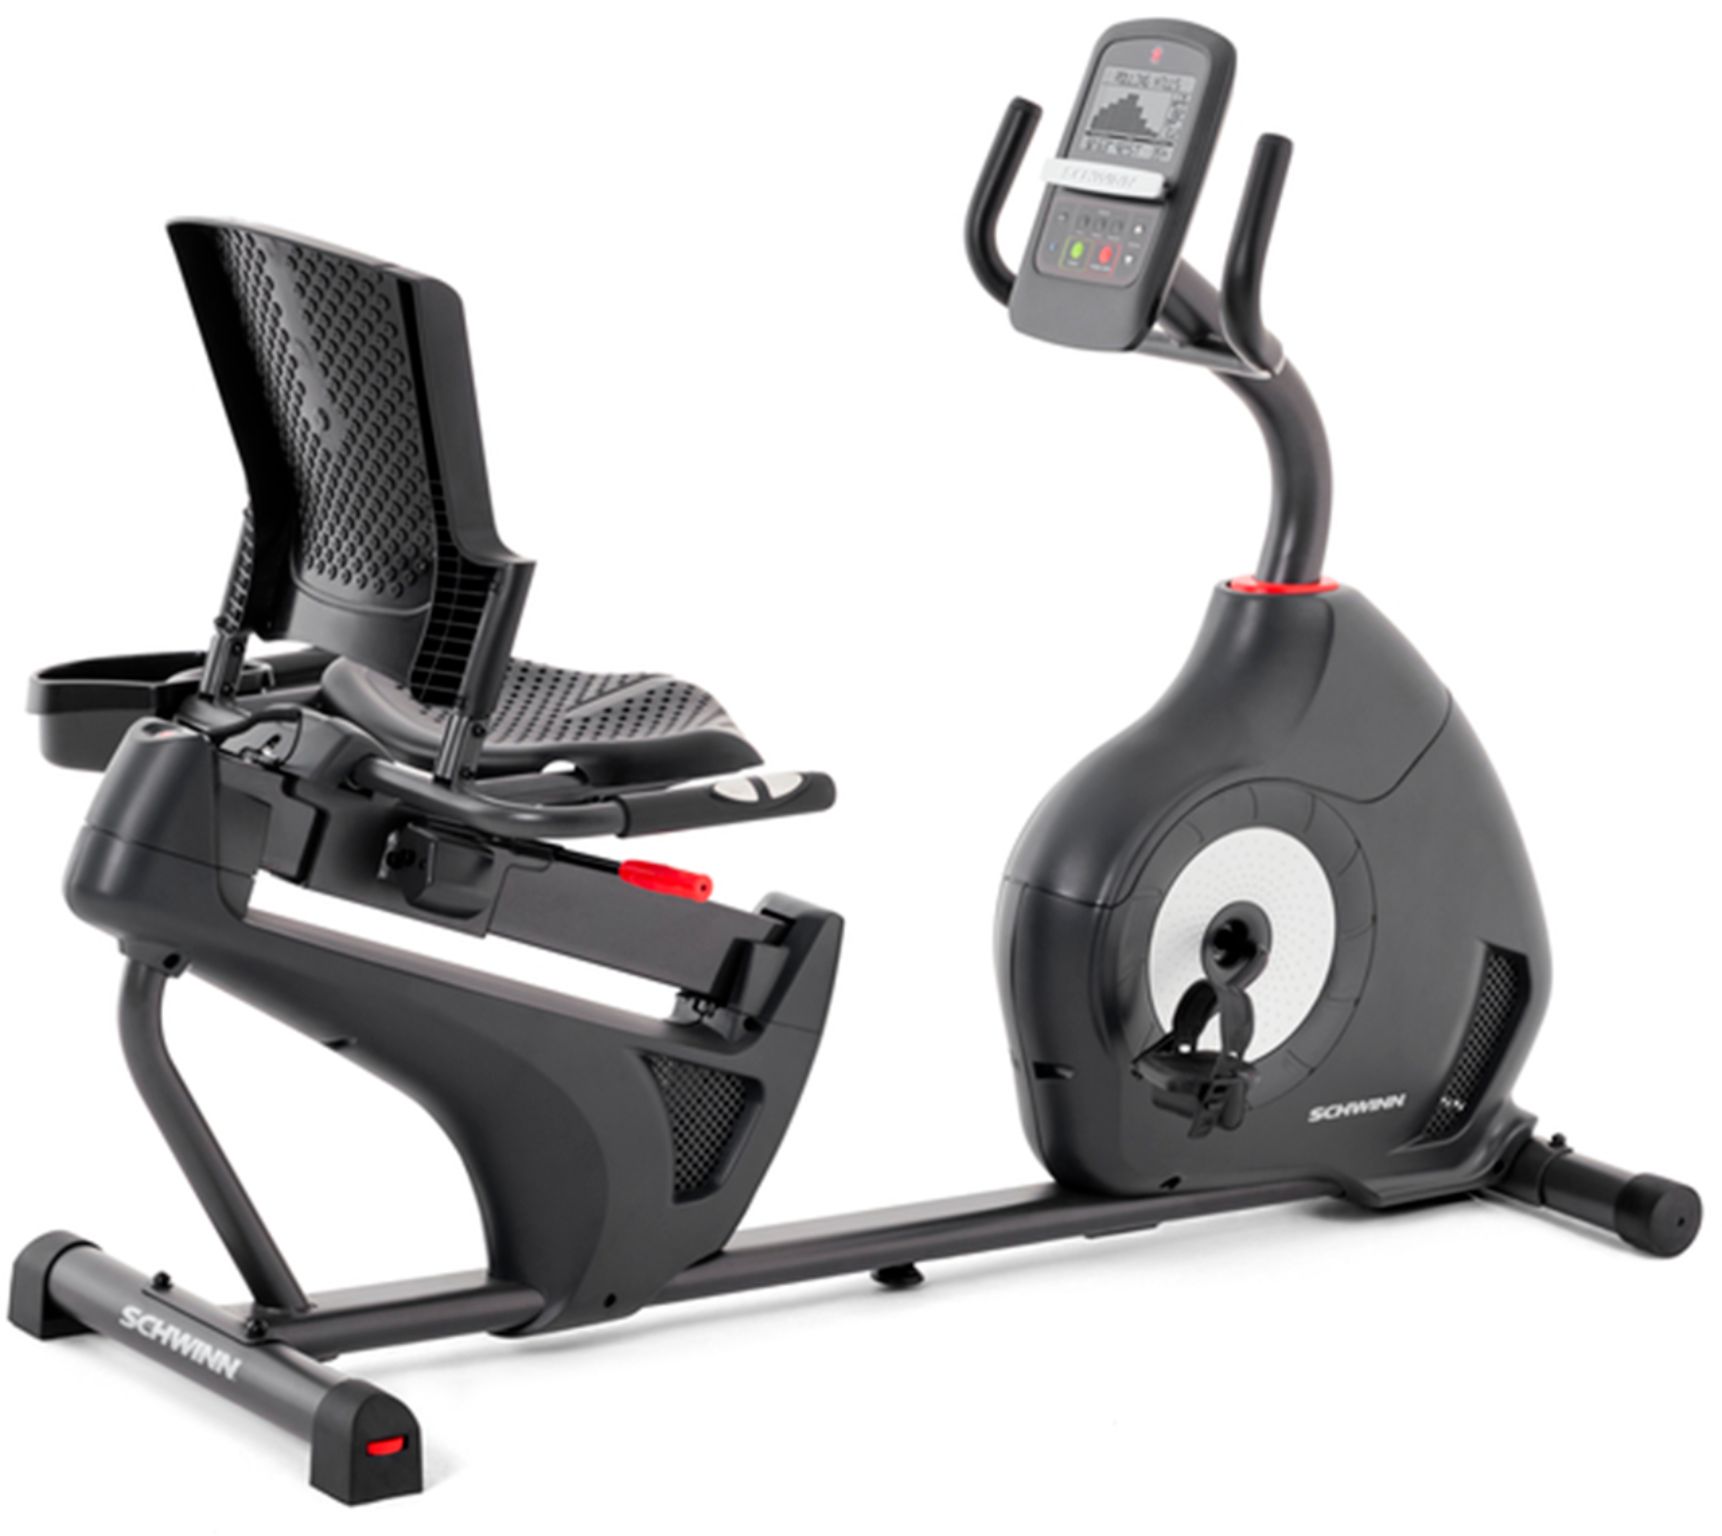 Details about   Schwinn Fitness 230 Recumbent Cardio Exercise Bike Black Local Pickup only 27587 